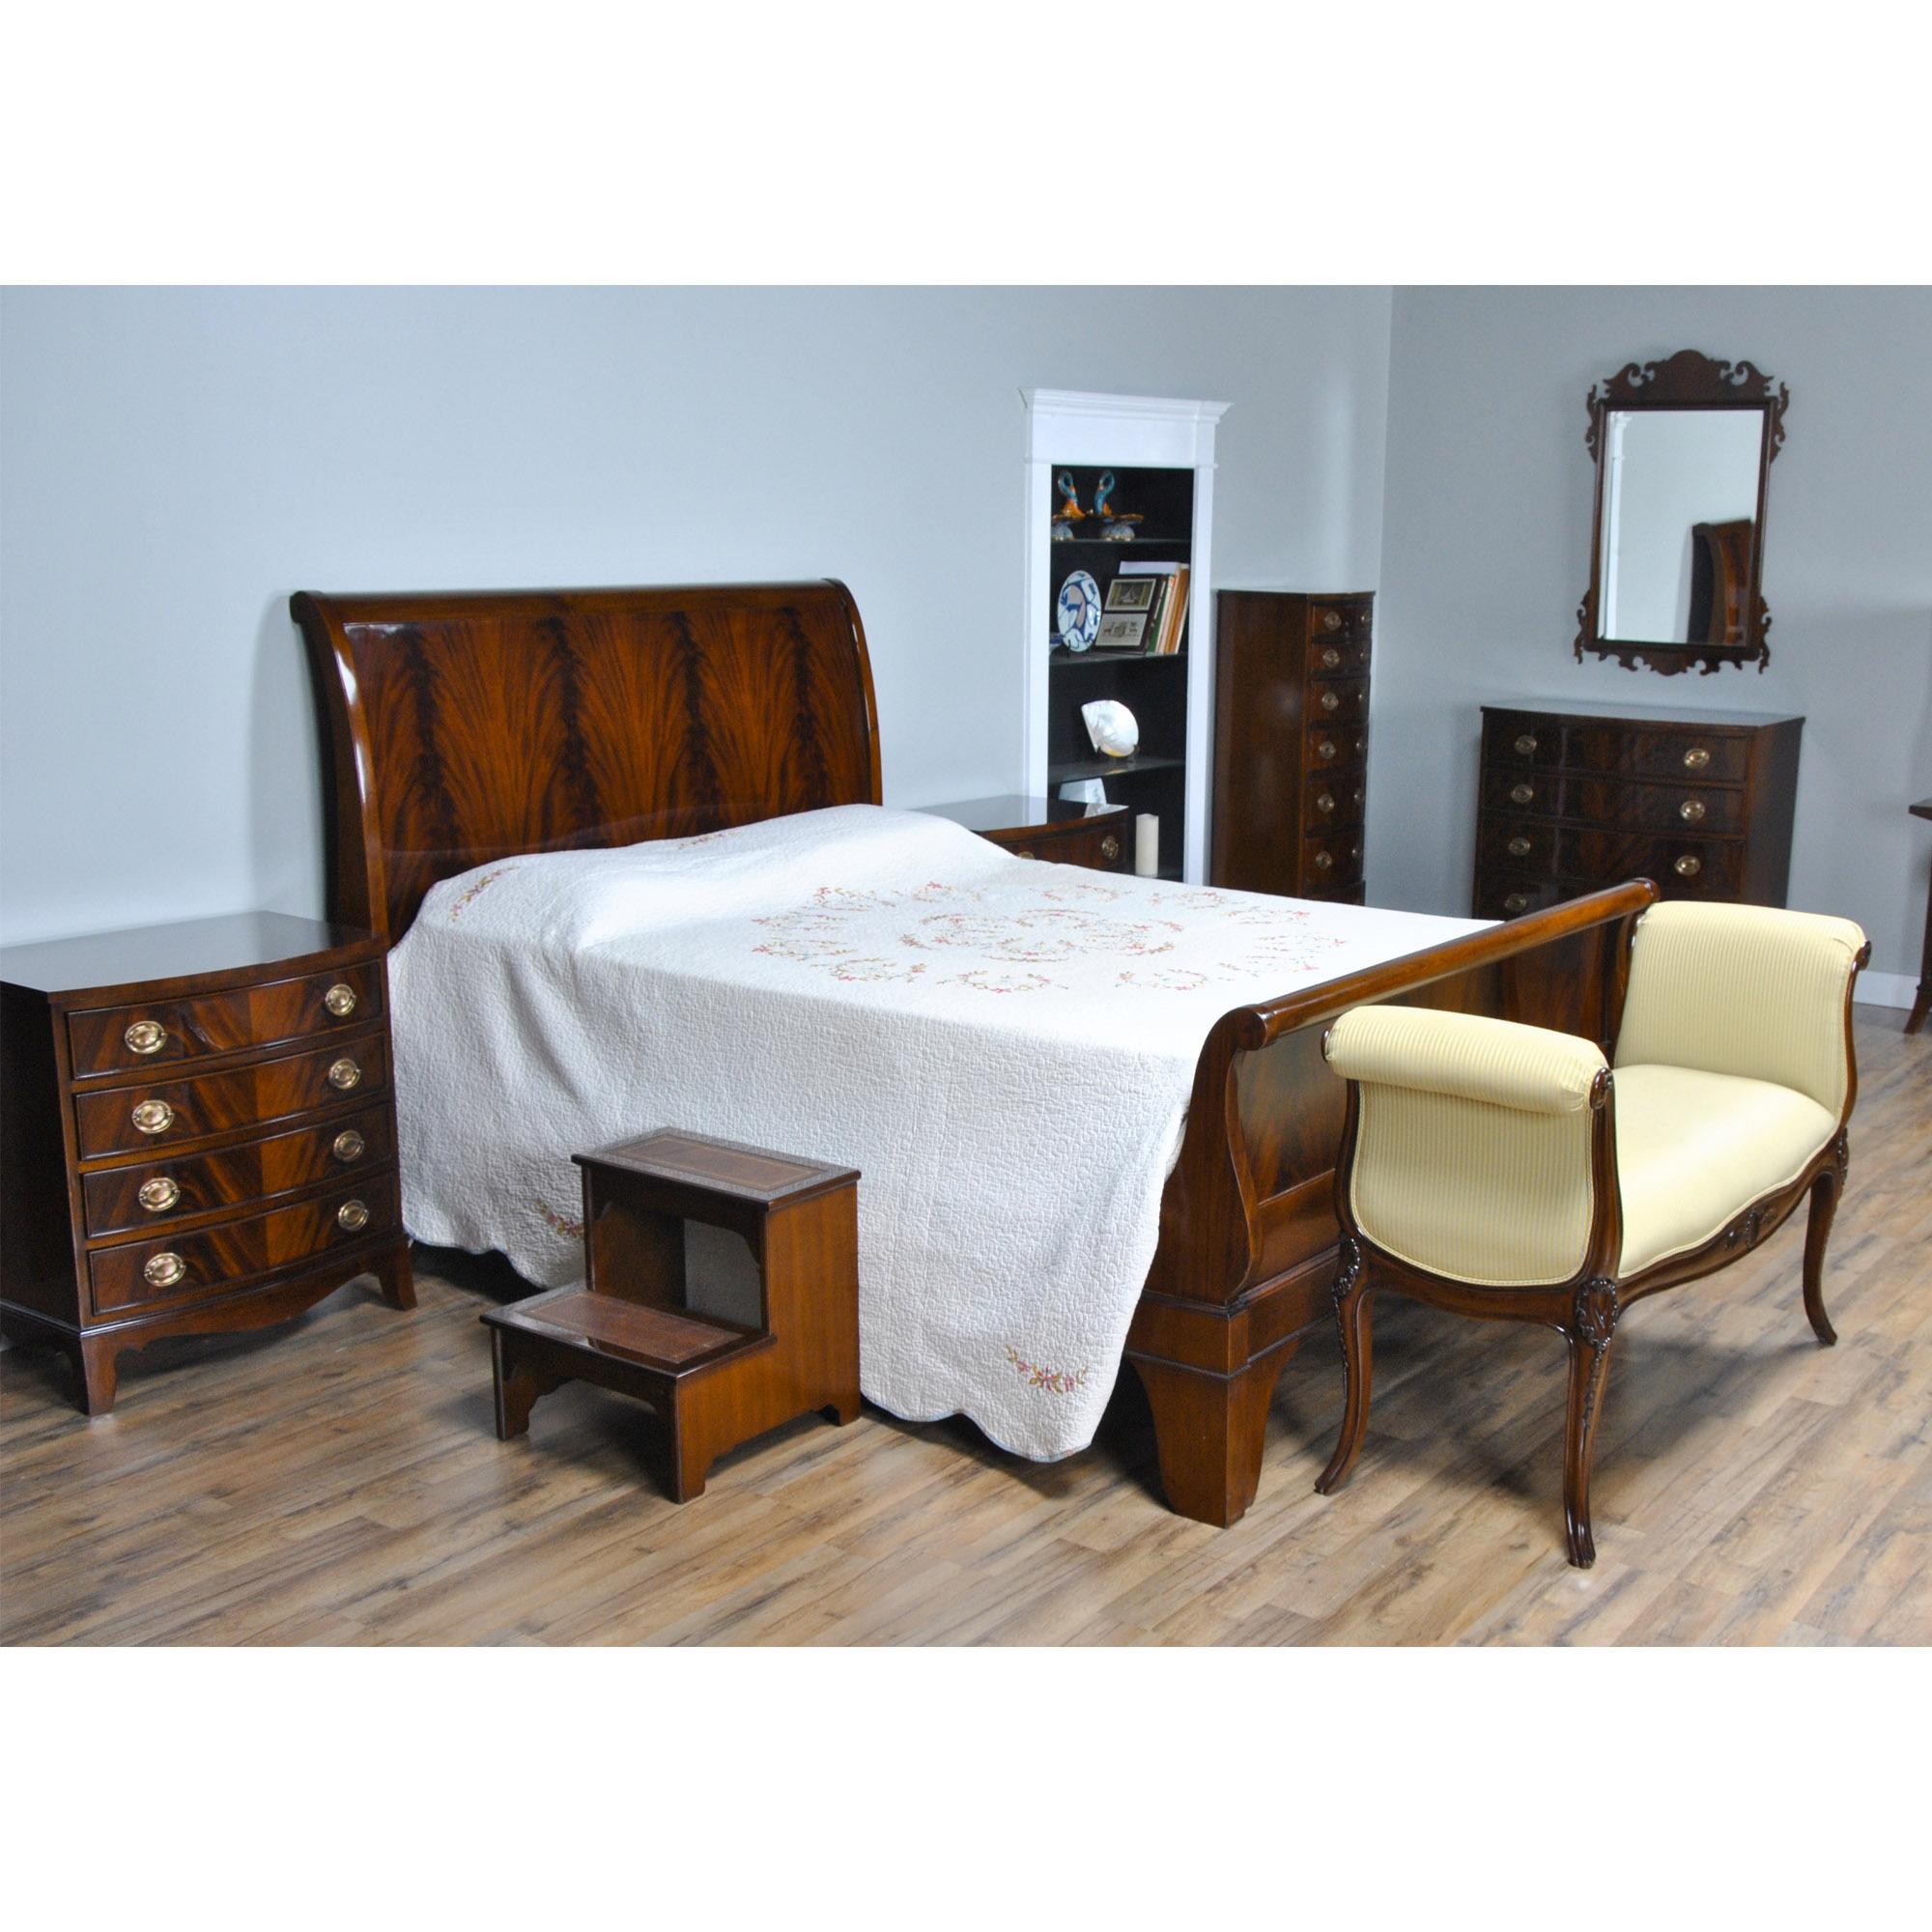 This is a Mahogany Queen Size Sleigh bed. The bed features a great quality solid mahogany frame along with the finest quality veneered panels which combine to form a sleek and elegant design that will compliment any decor. Also known as a platform